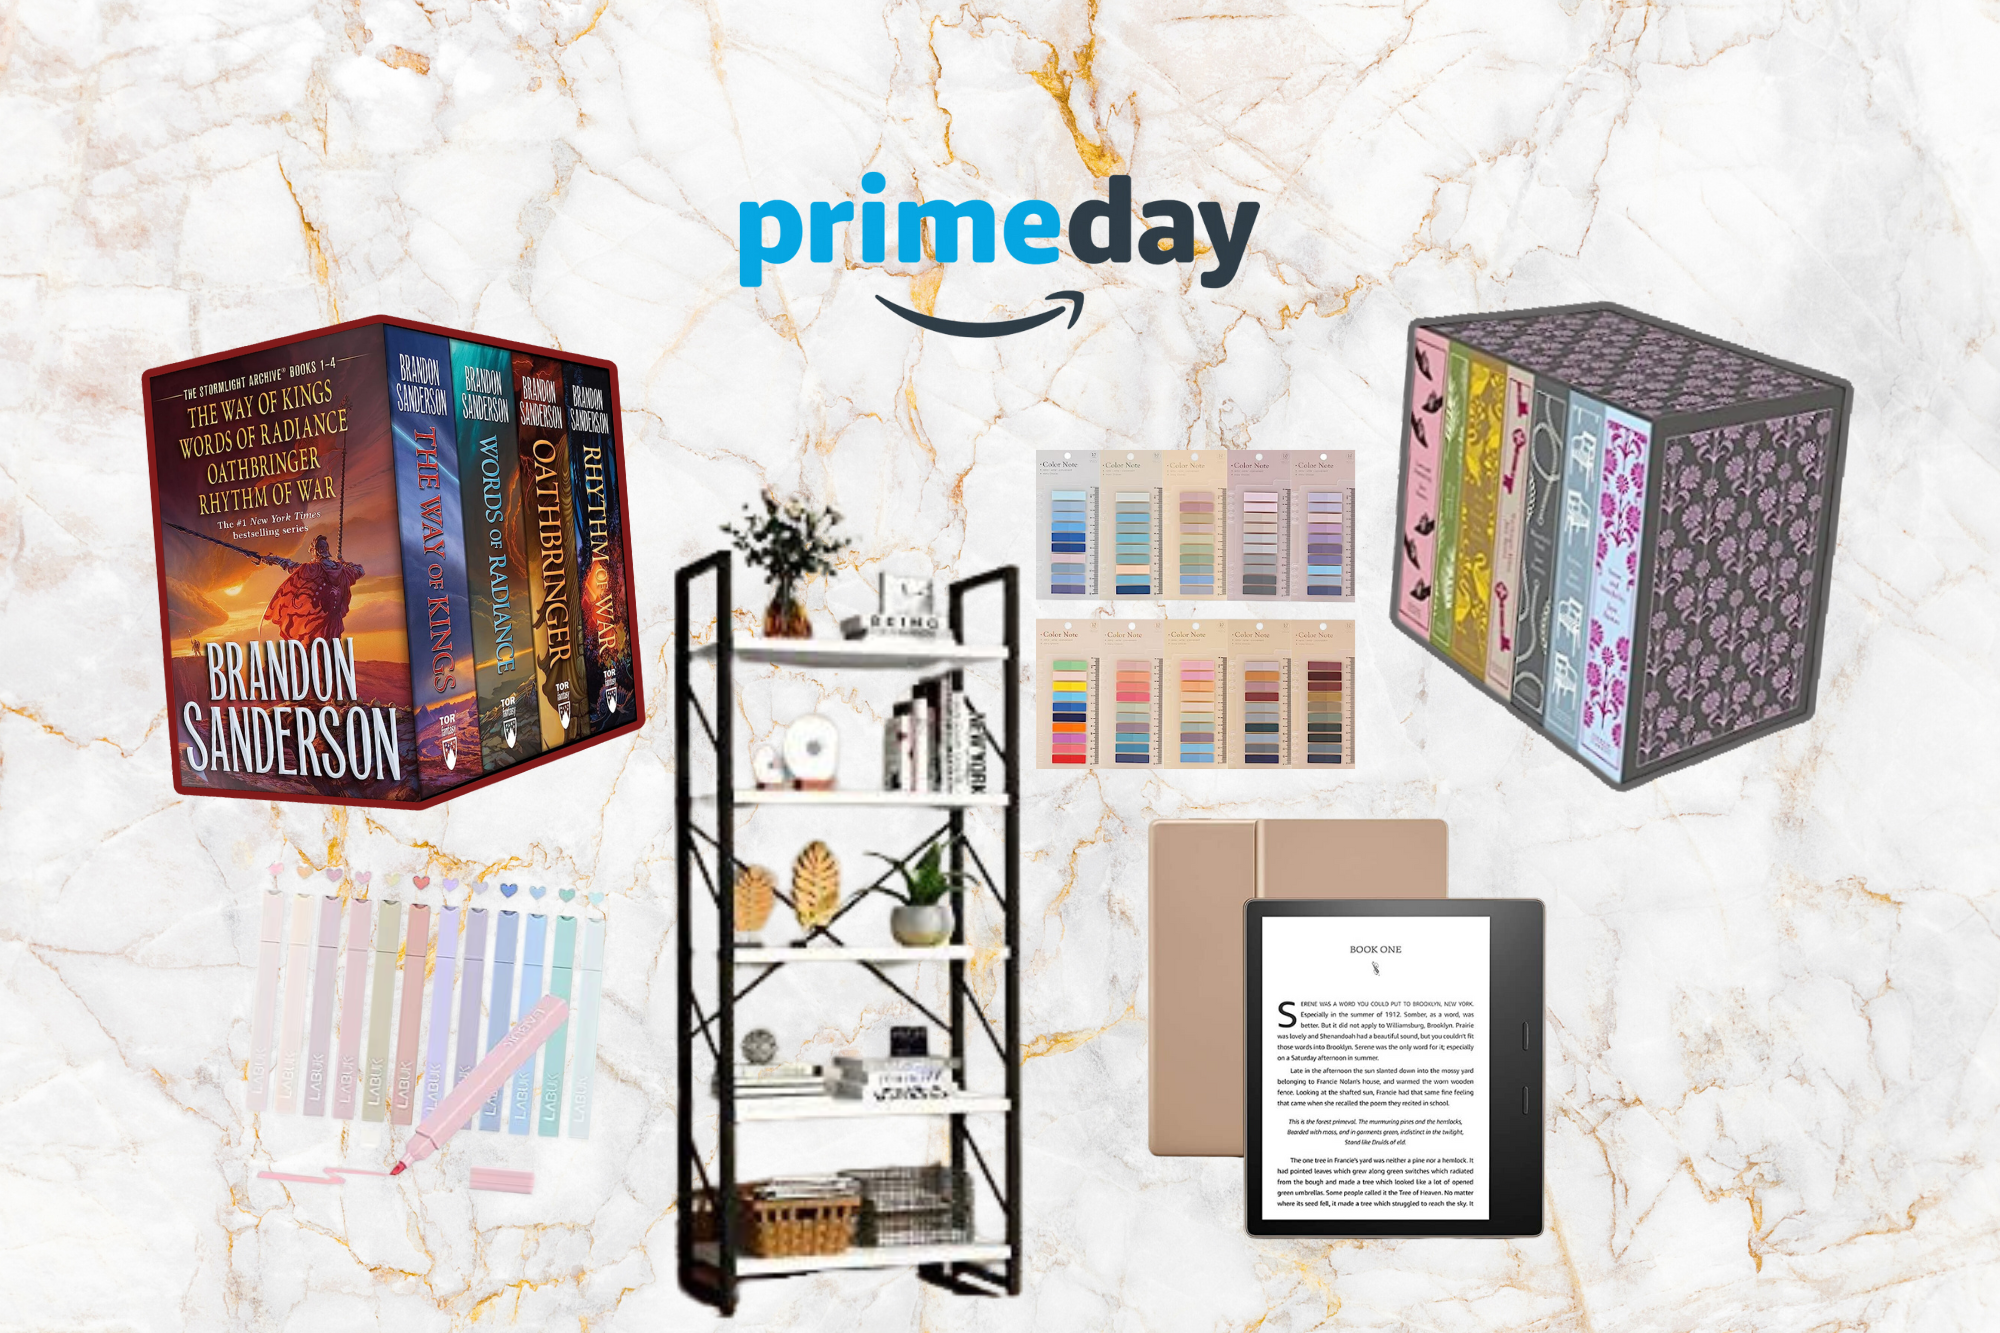 The Second Annual, Ultimate Bookish Prime Day Guide for Book